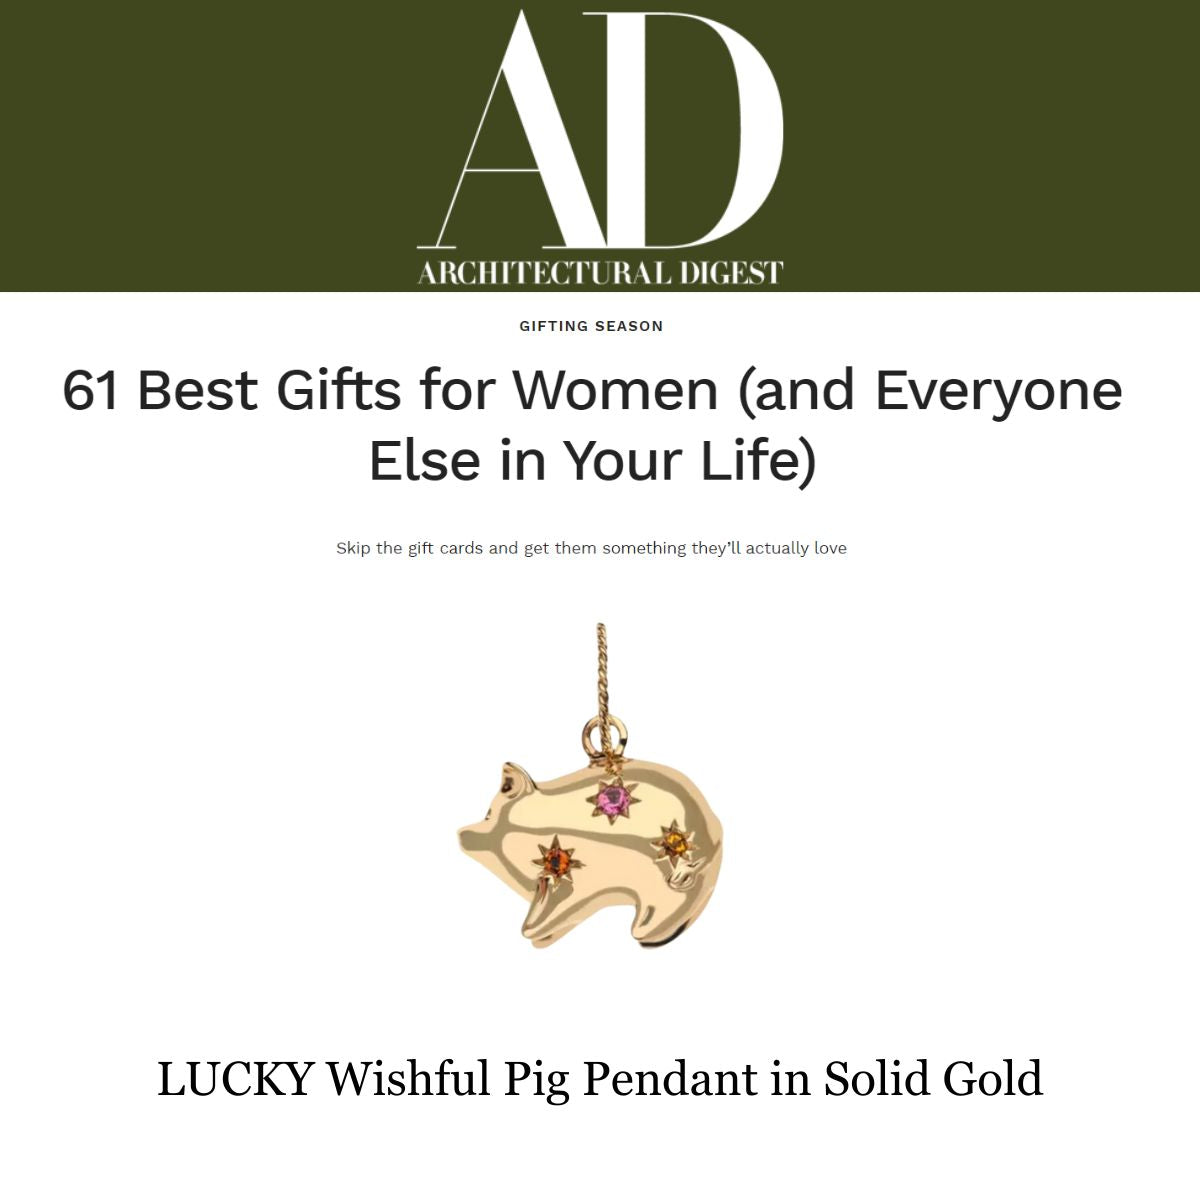 Press Highlight: Architectural Digests "61 Best Gifts for Women (and Everyone Else in Your Life)"